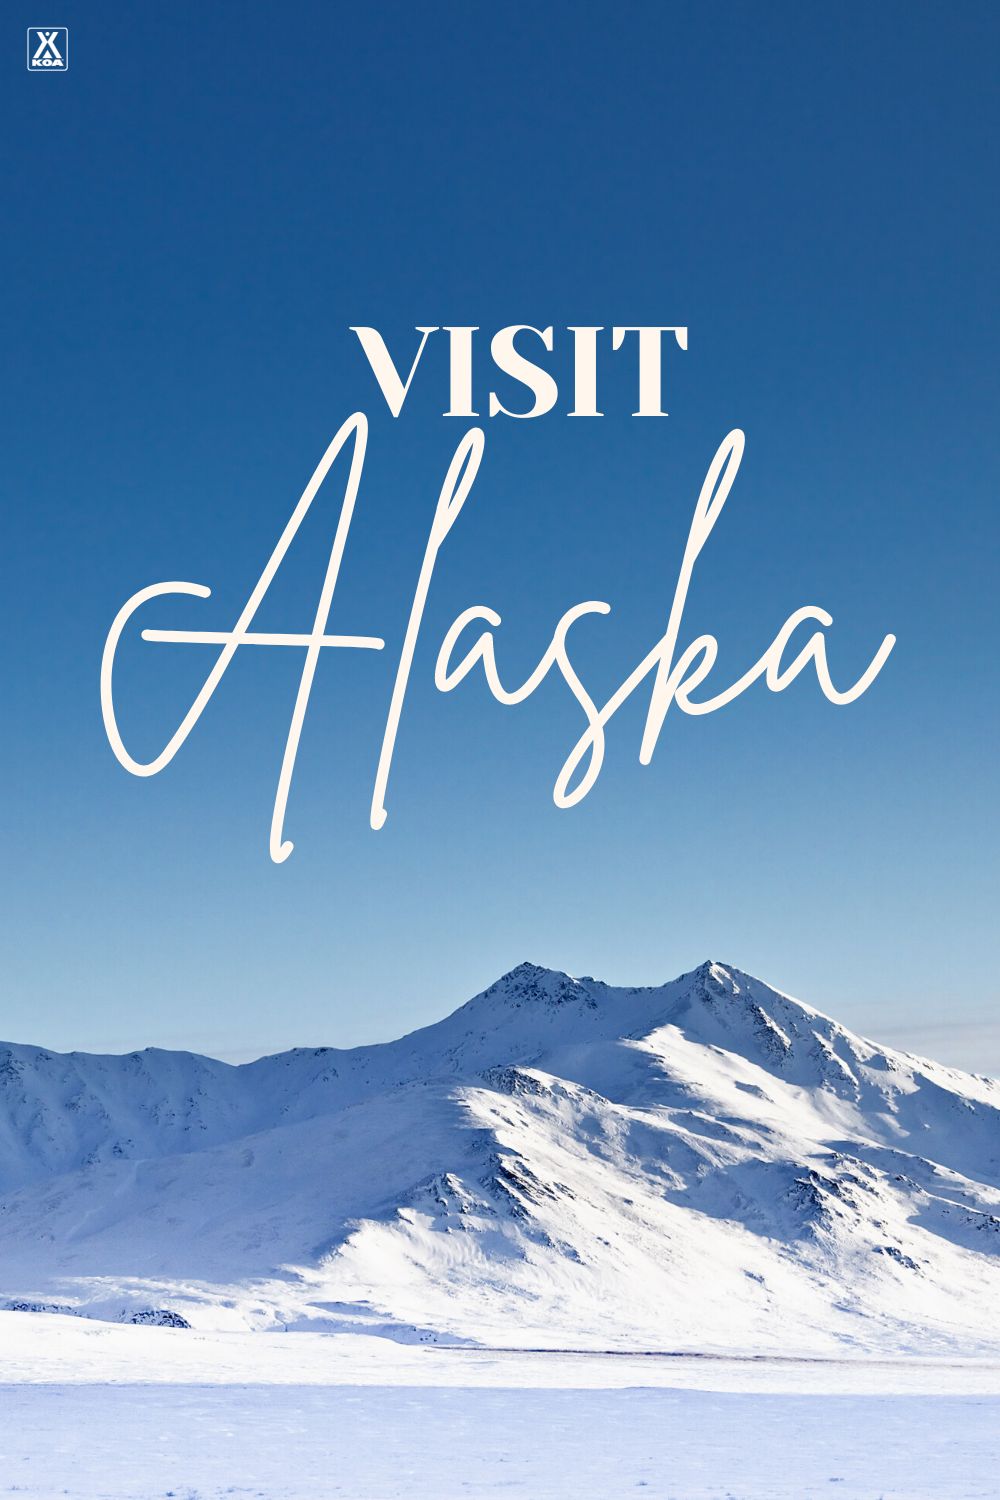 Want to vacation to Alaska in the winter? Where should you travel? What makes winter vacations to Alaska special? Find out with KOA!